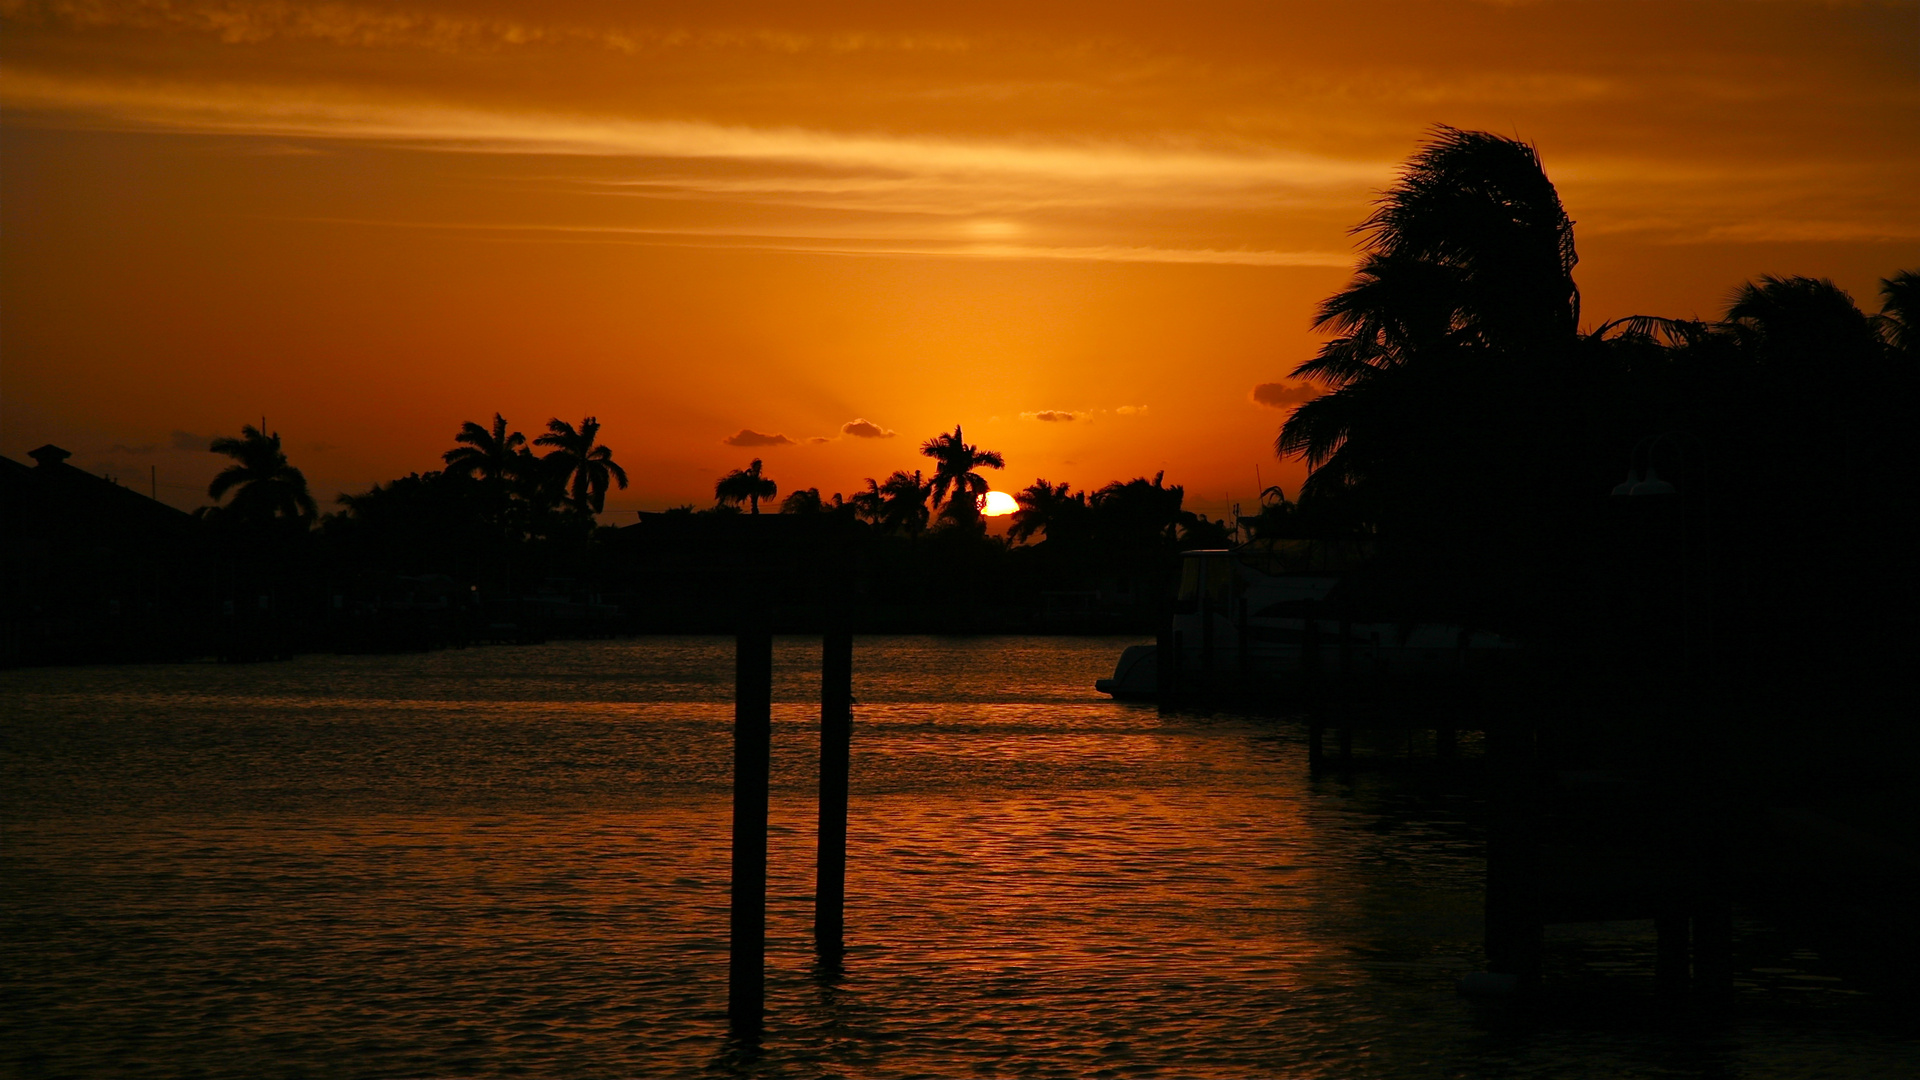 Sunset @ Cape Coral